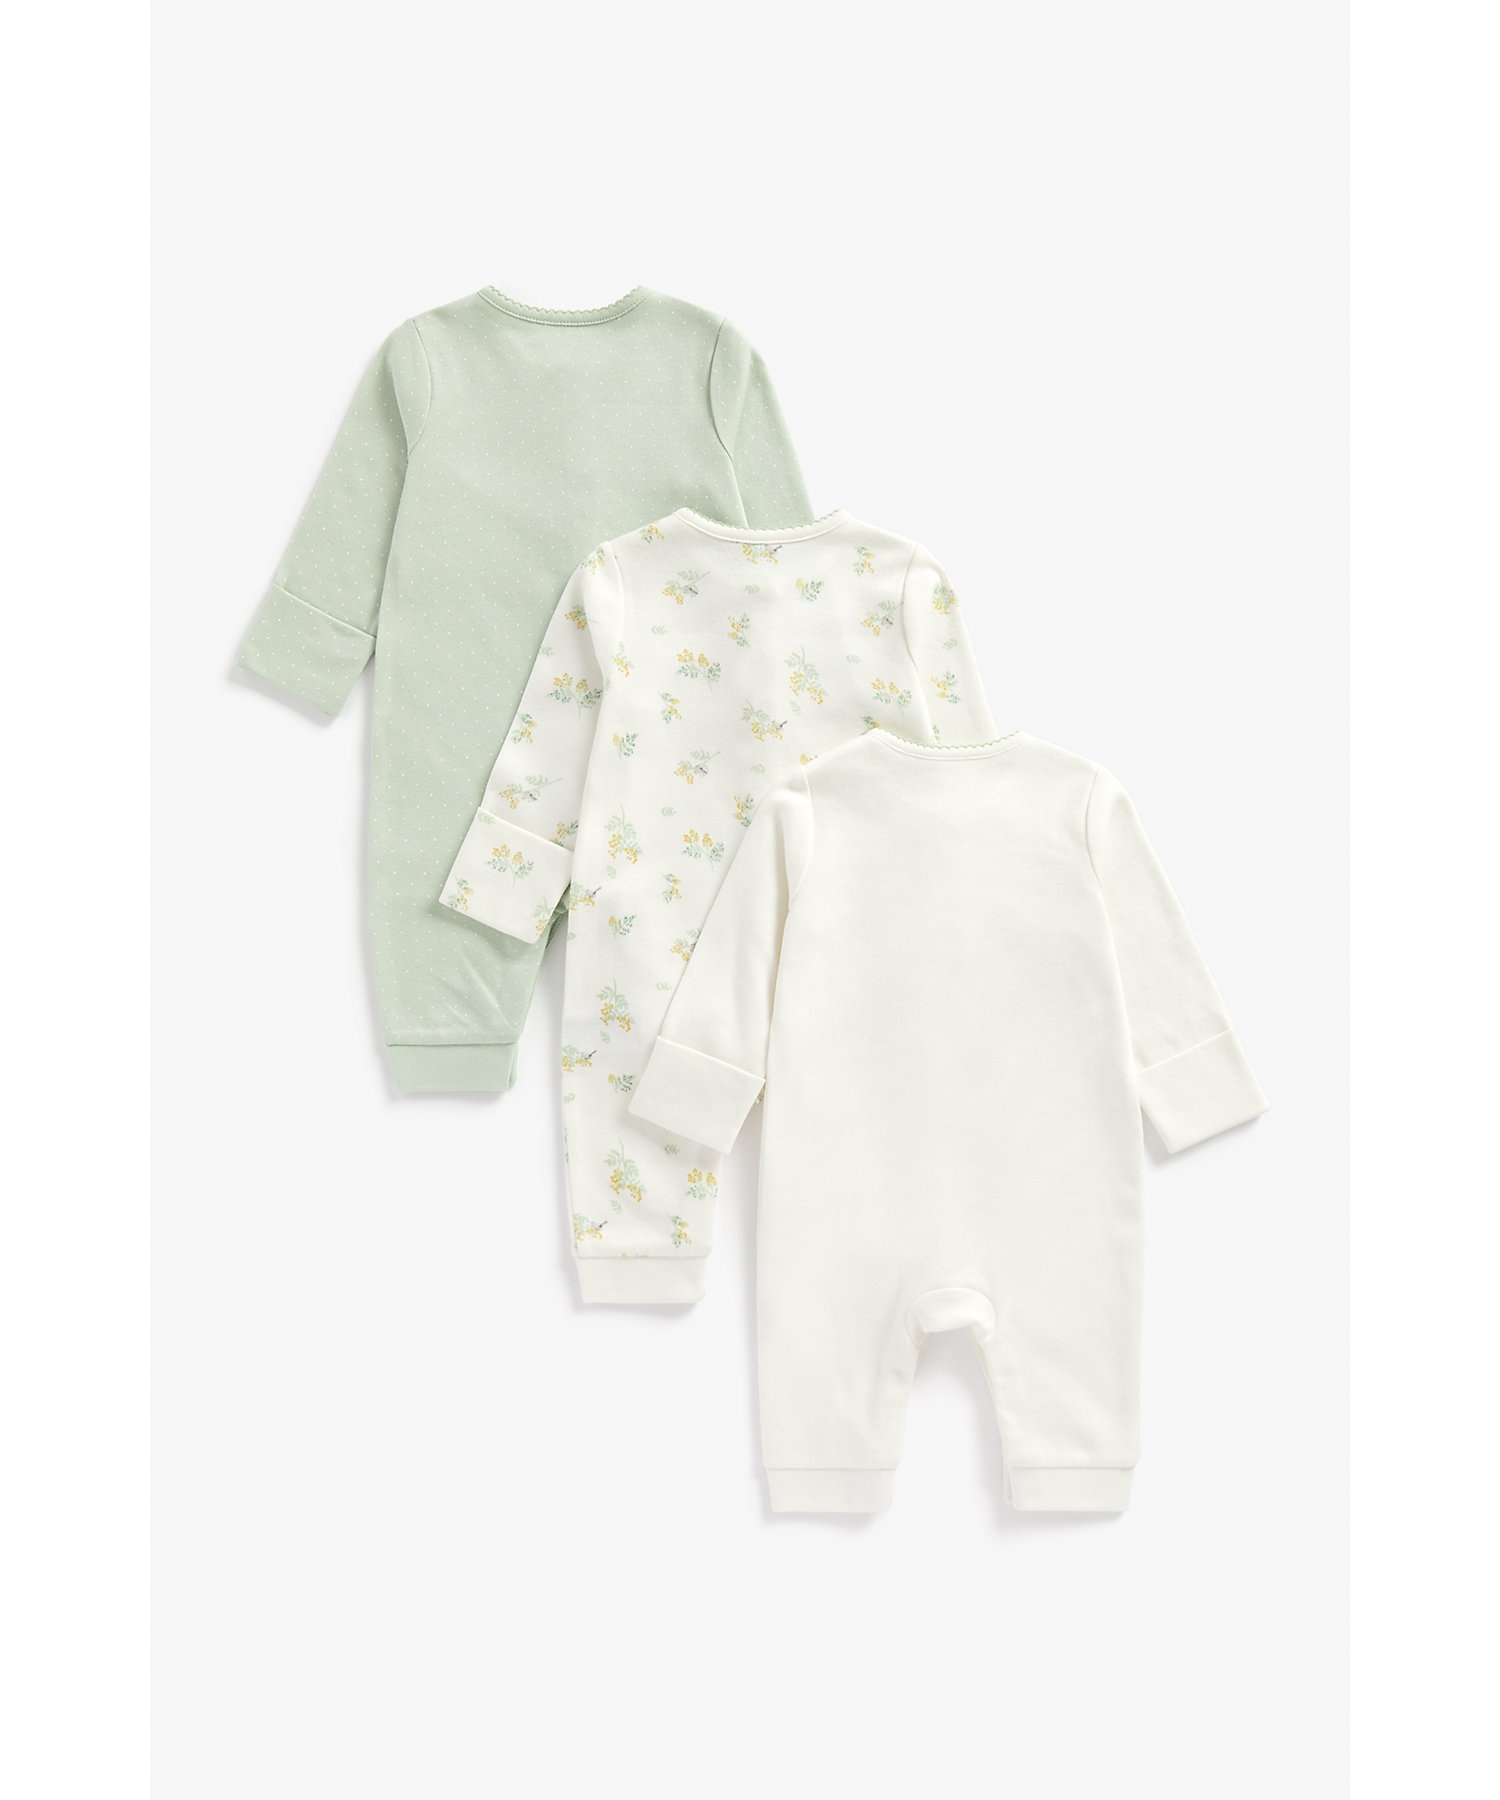 Mothercare | Girls Full Sleeves Sleepsuits - Pack of 3 - Multicolor 1